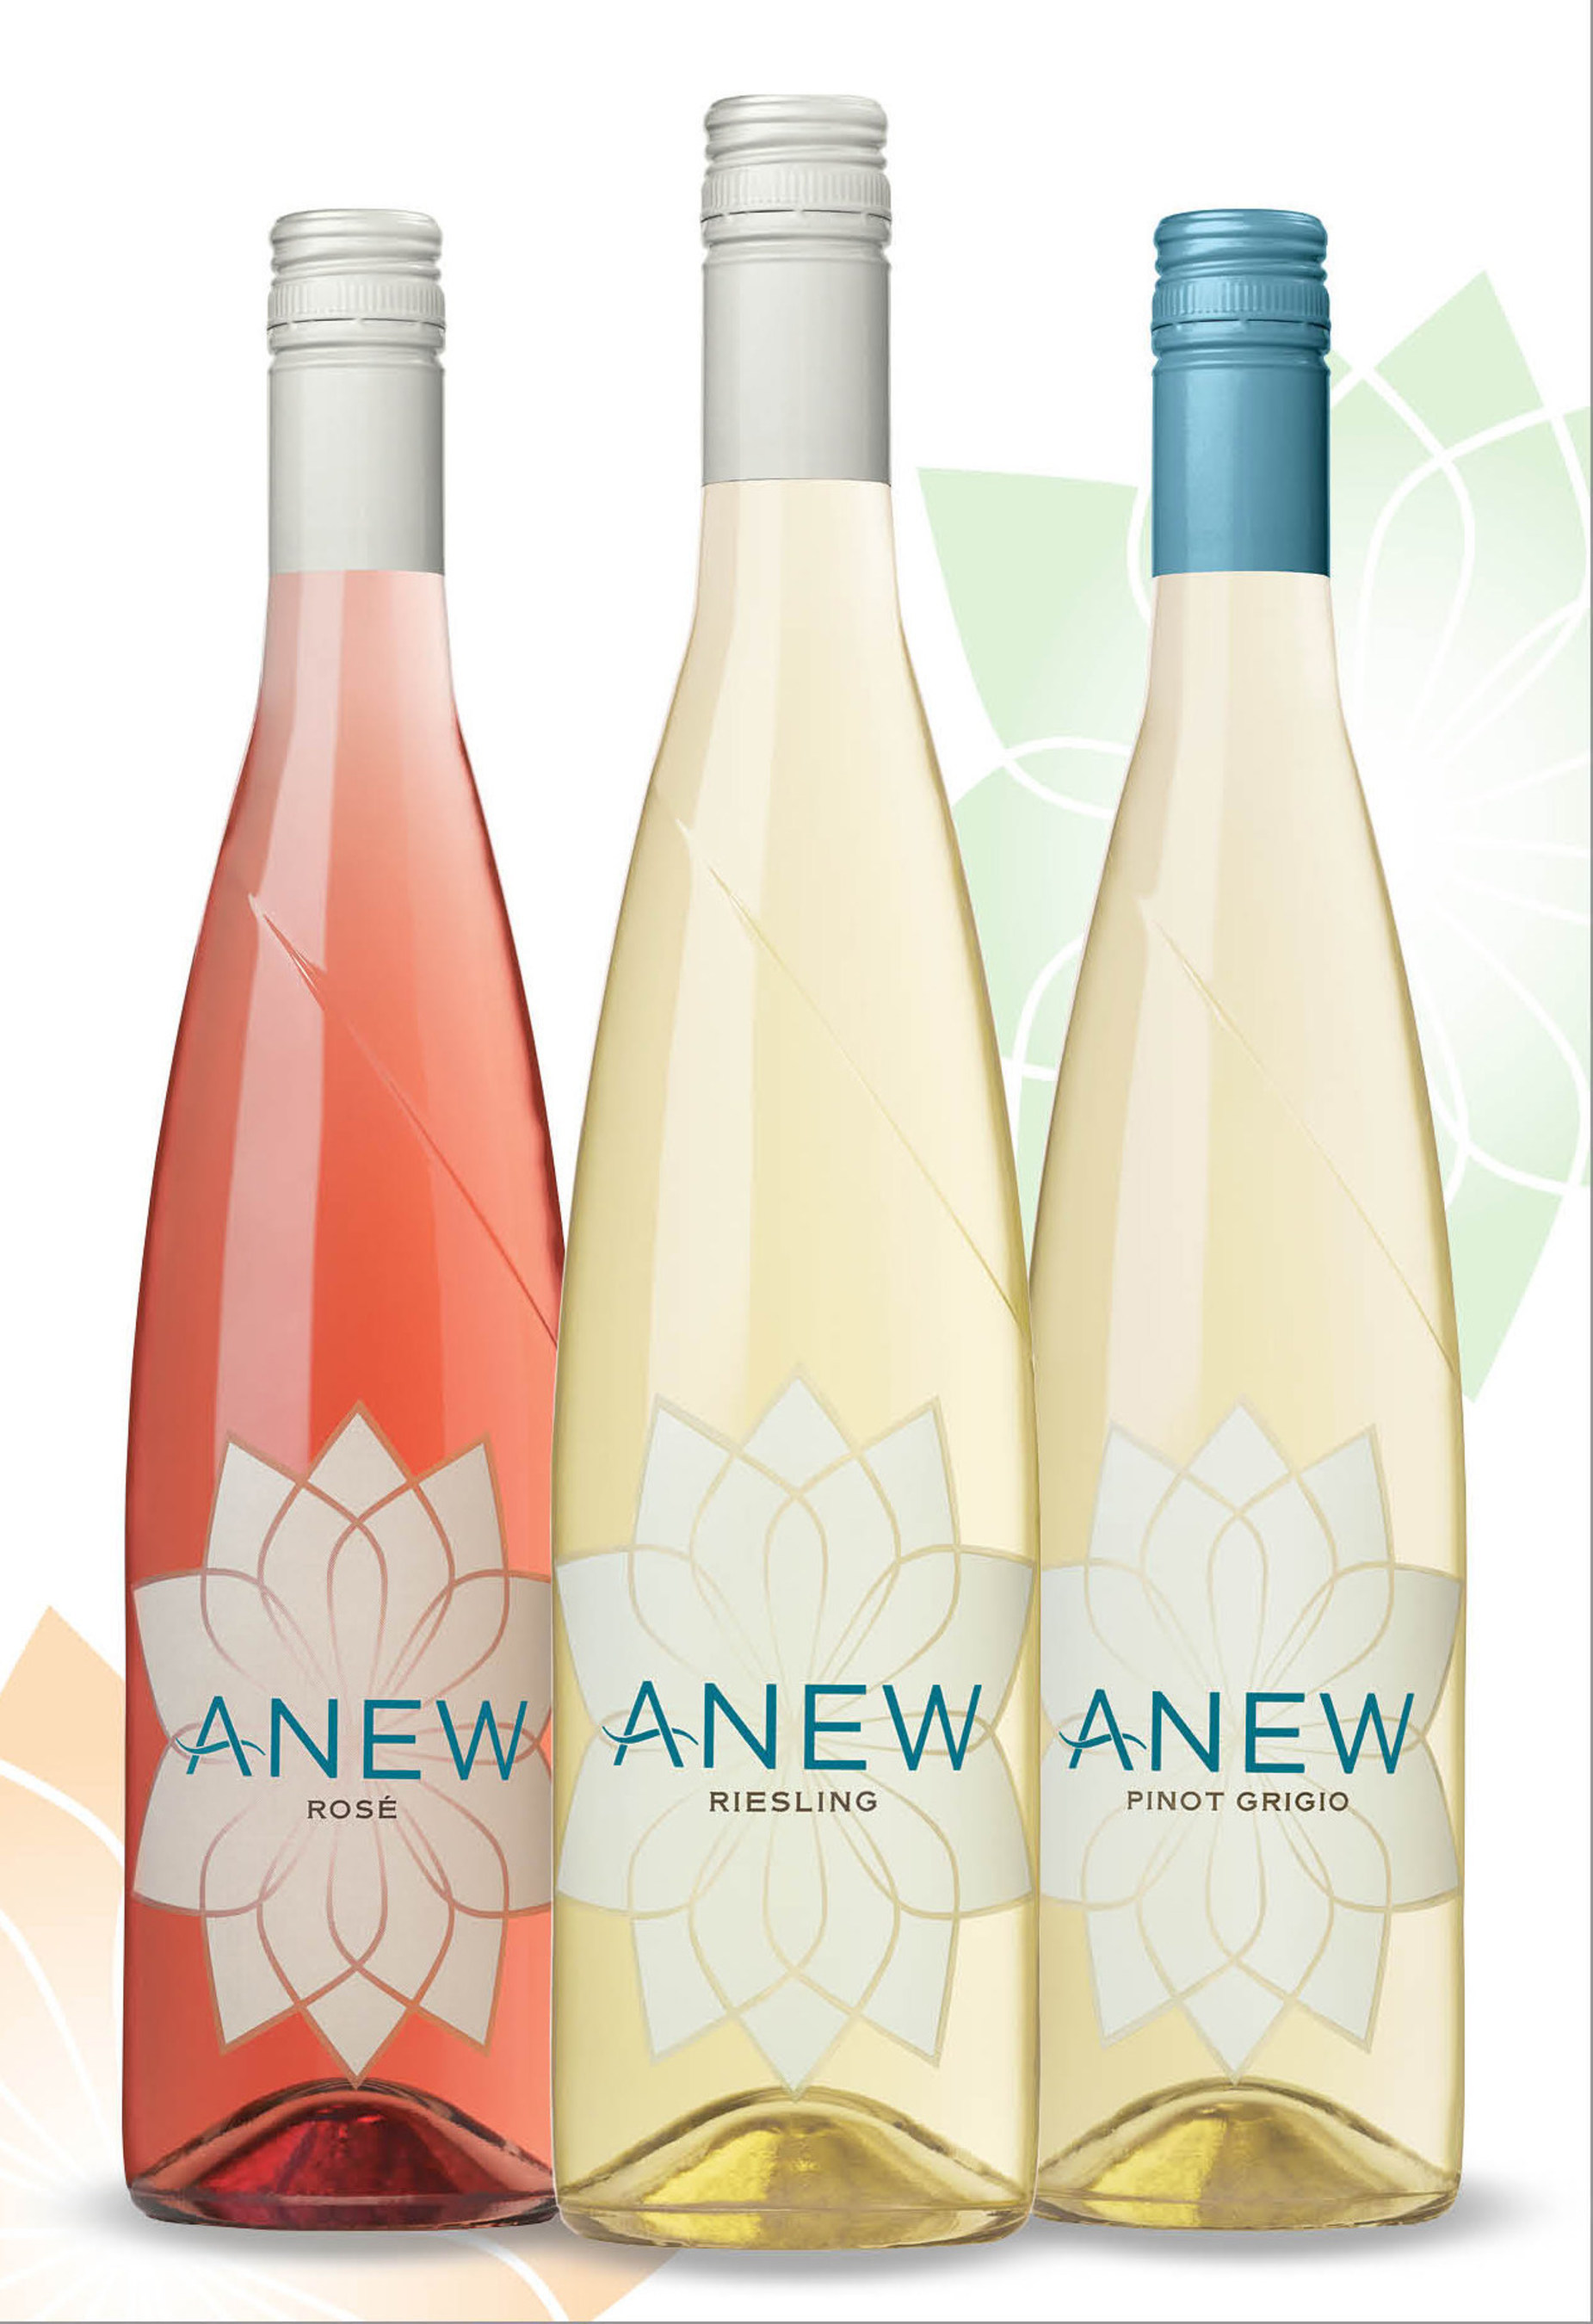 Washington's ANEW wines add a refreshing Pinot Grigio and a flavorful Rose to its varietal line.